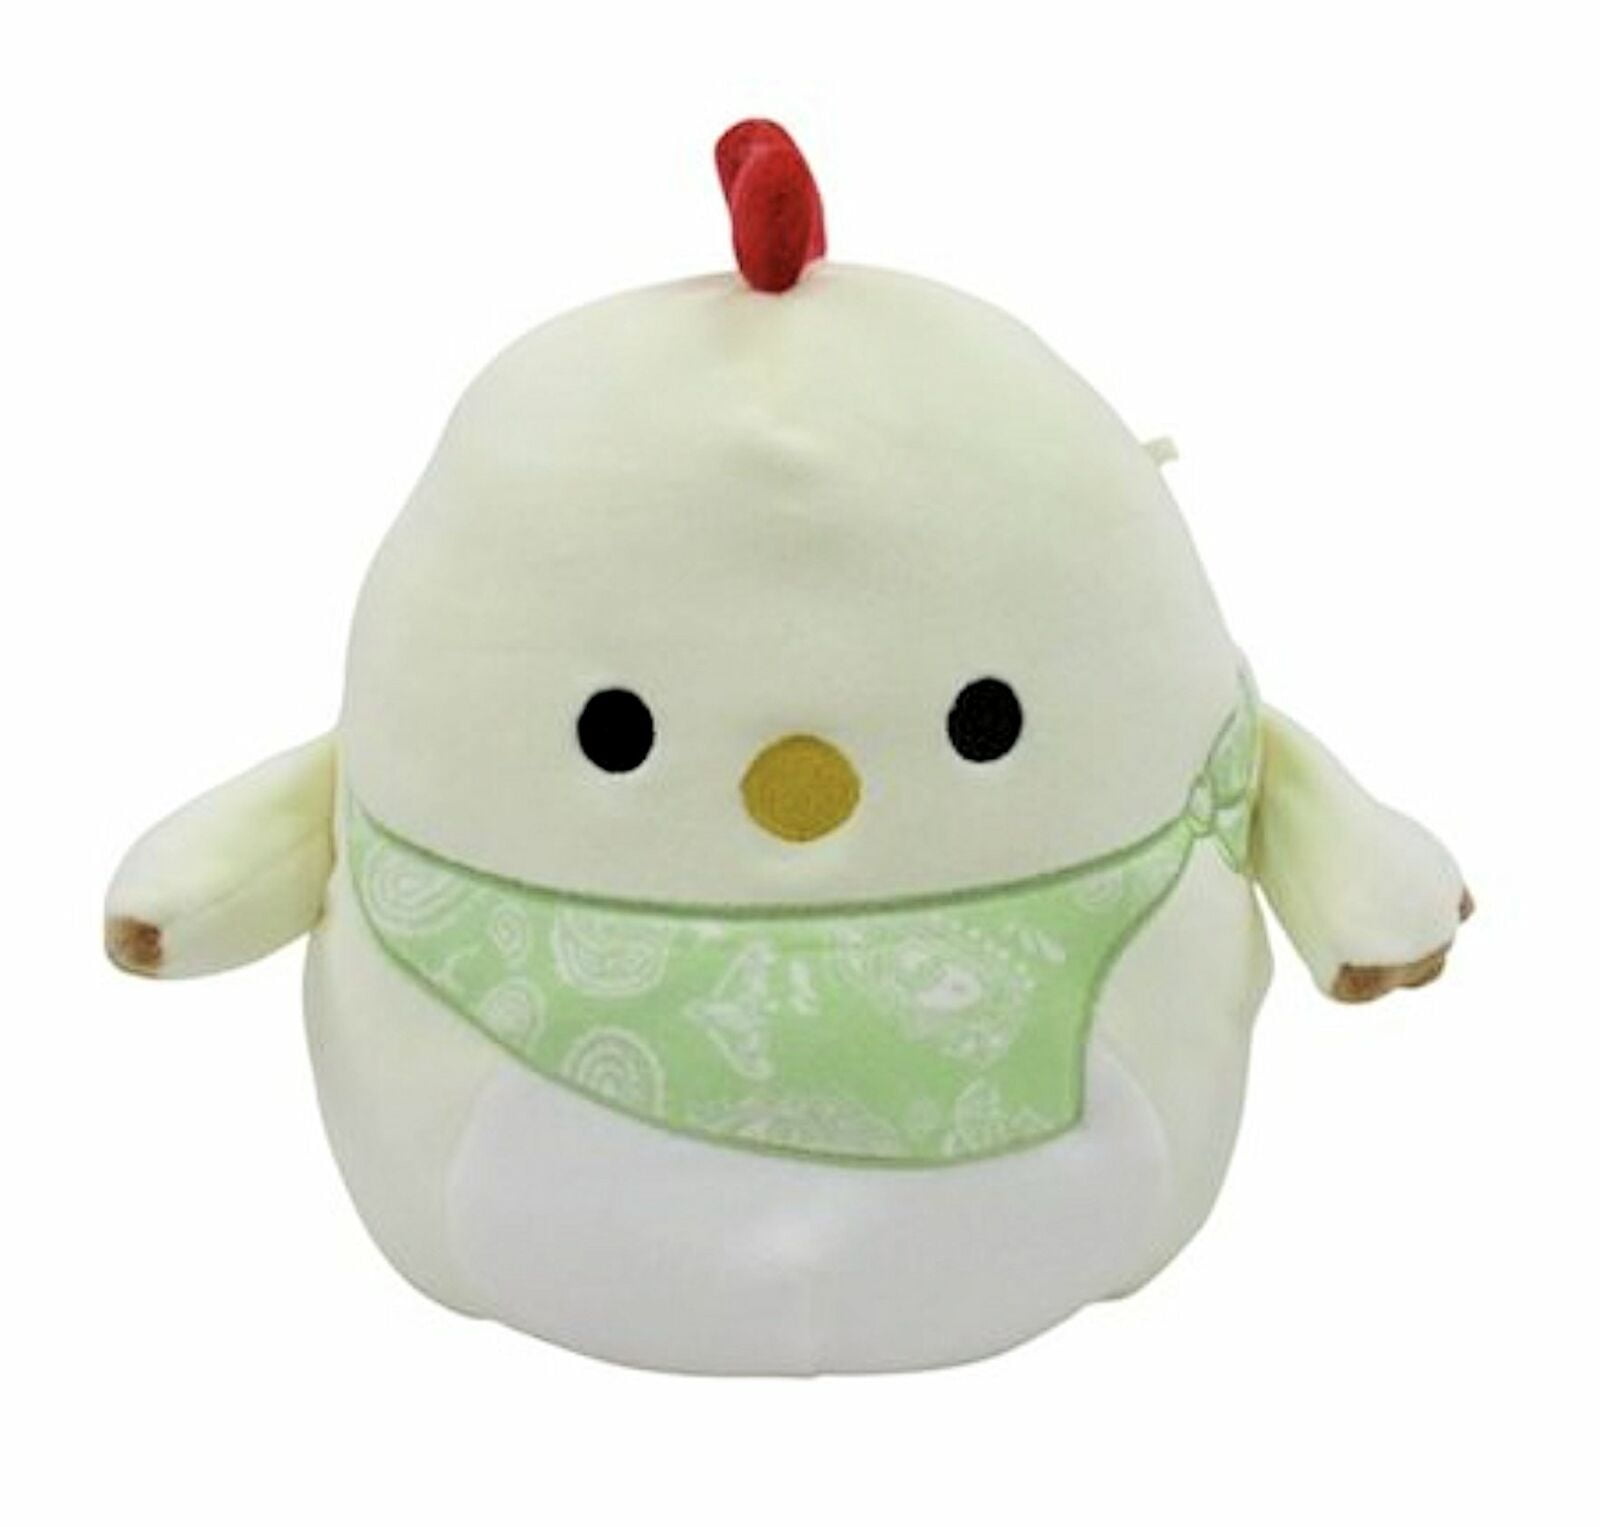 Kellytoy Squishmallow 8" Todd The Chick Bandana Plush Easter 2021 Edition for sale online 